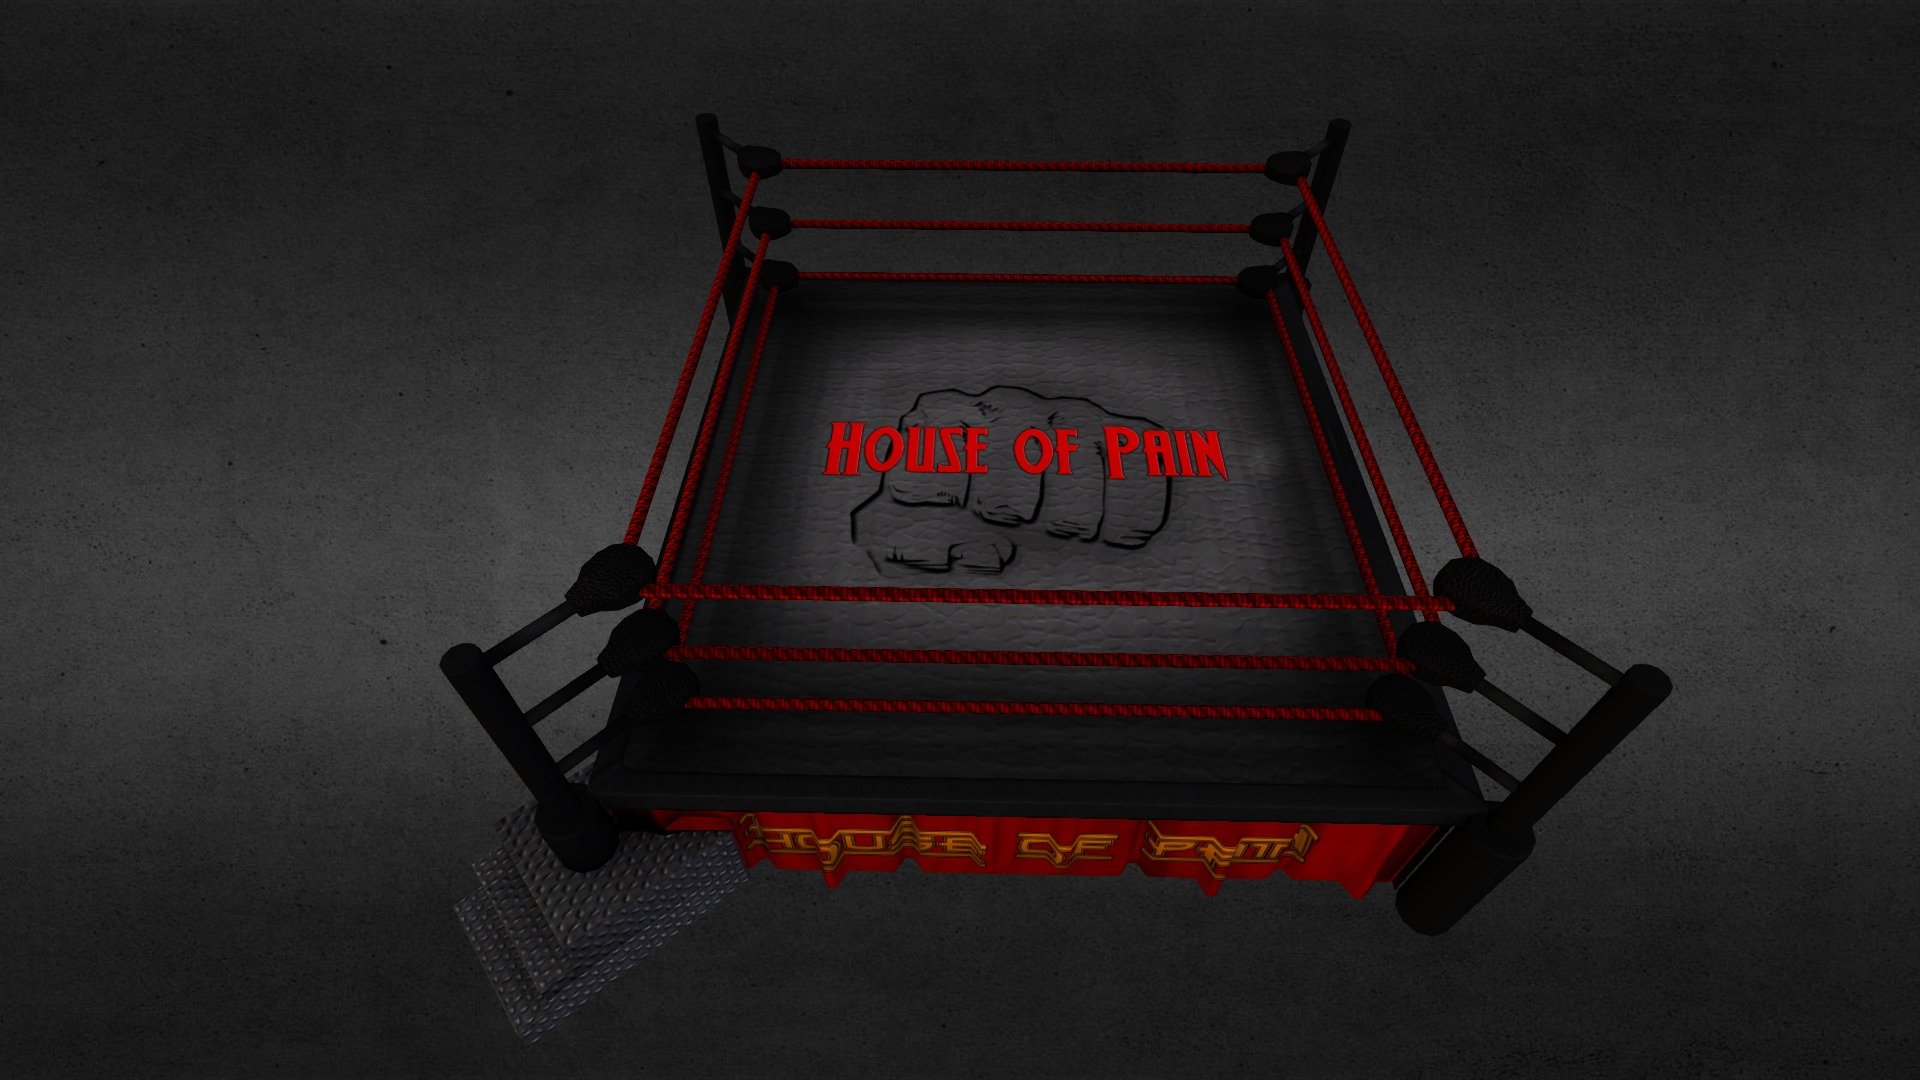 House of Pain 
Wrestling Ring 
Unity Game 
WIP - House of Pain - Wrestling Ring - Unity Game WIP - 3D model by DevinKeys 3d model